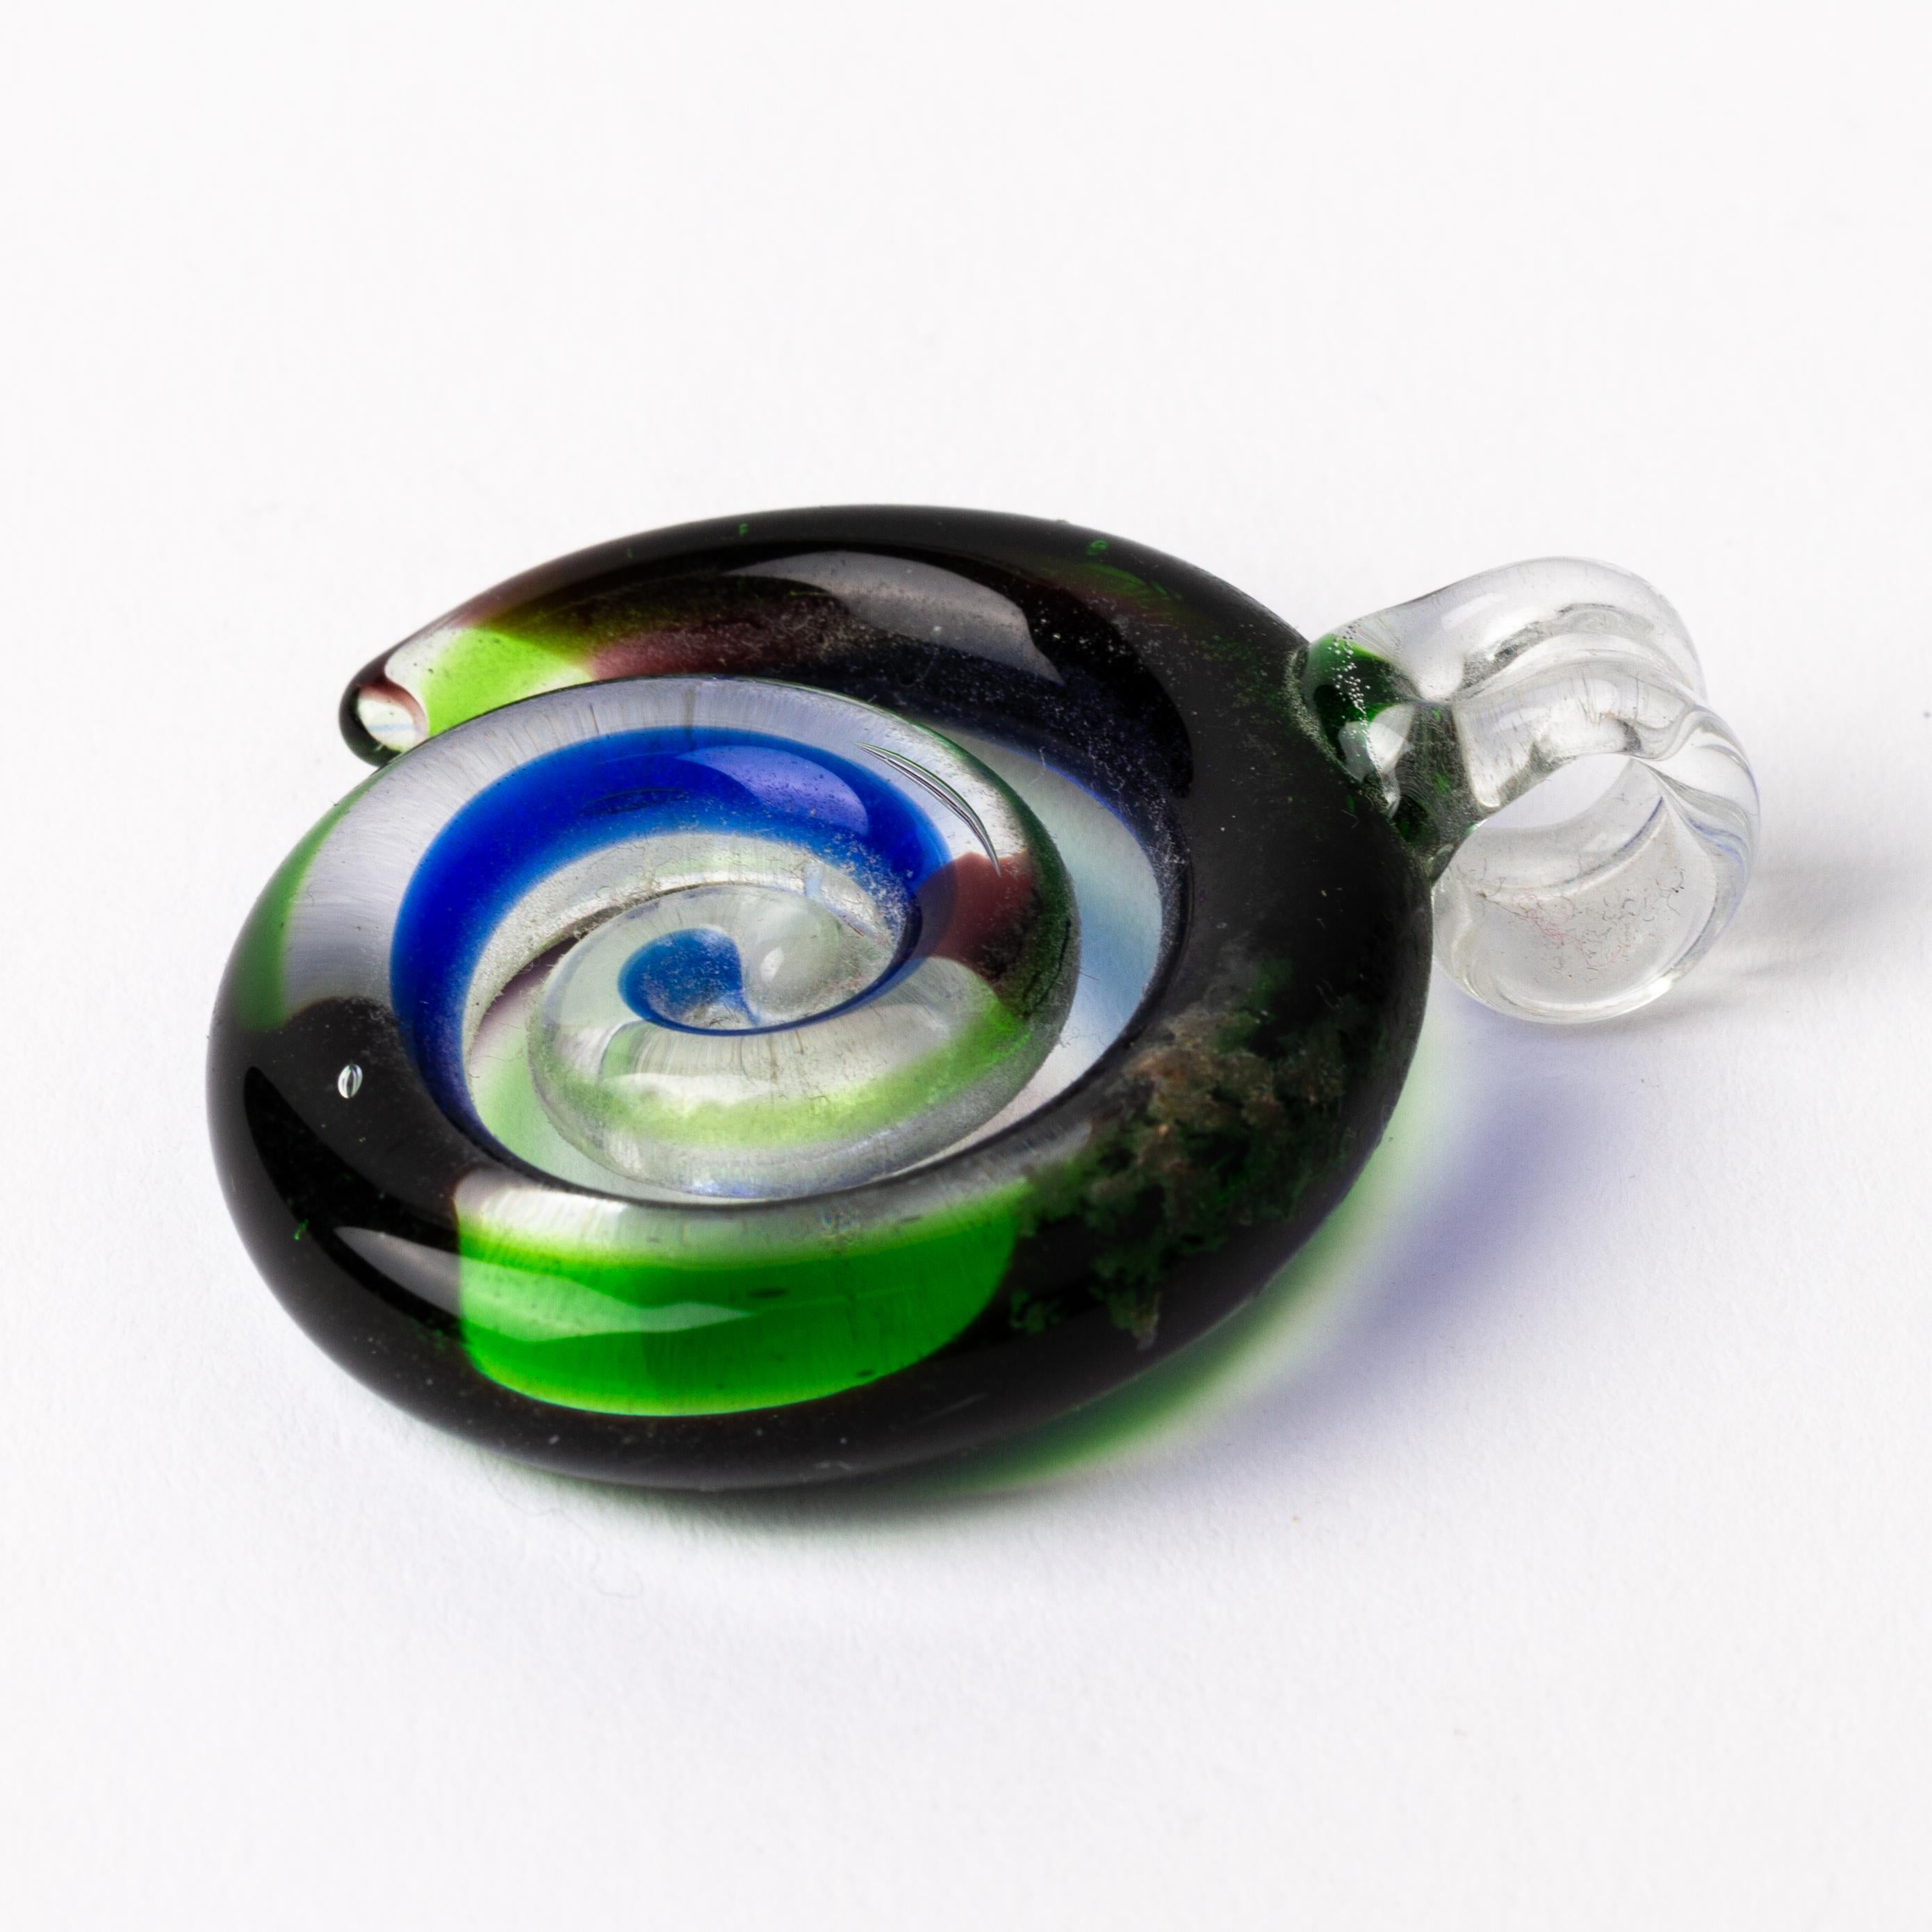 In good condition
From a private collection
Free international shipping
Murano Venetian Glass Designer Pendant